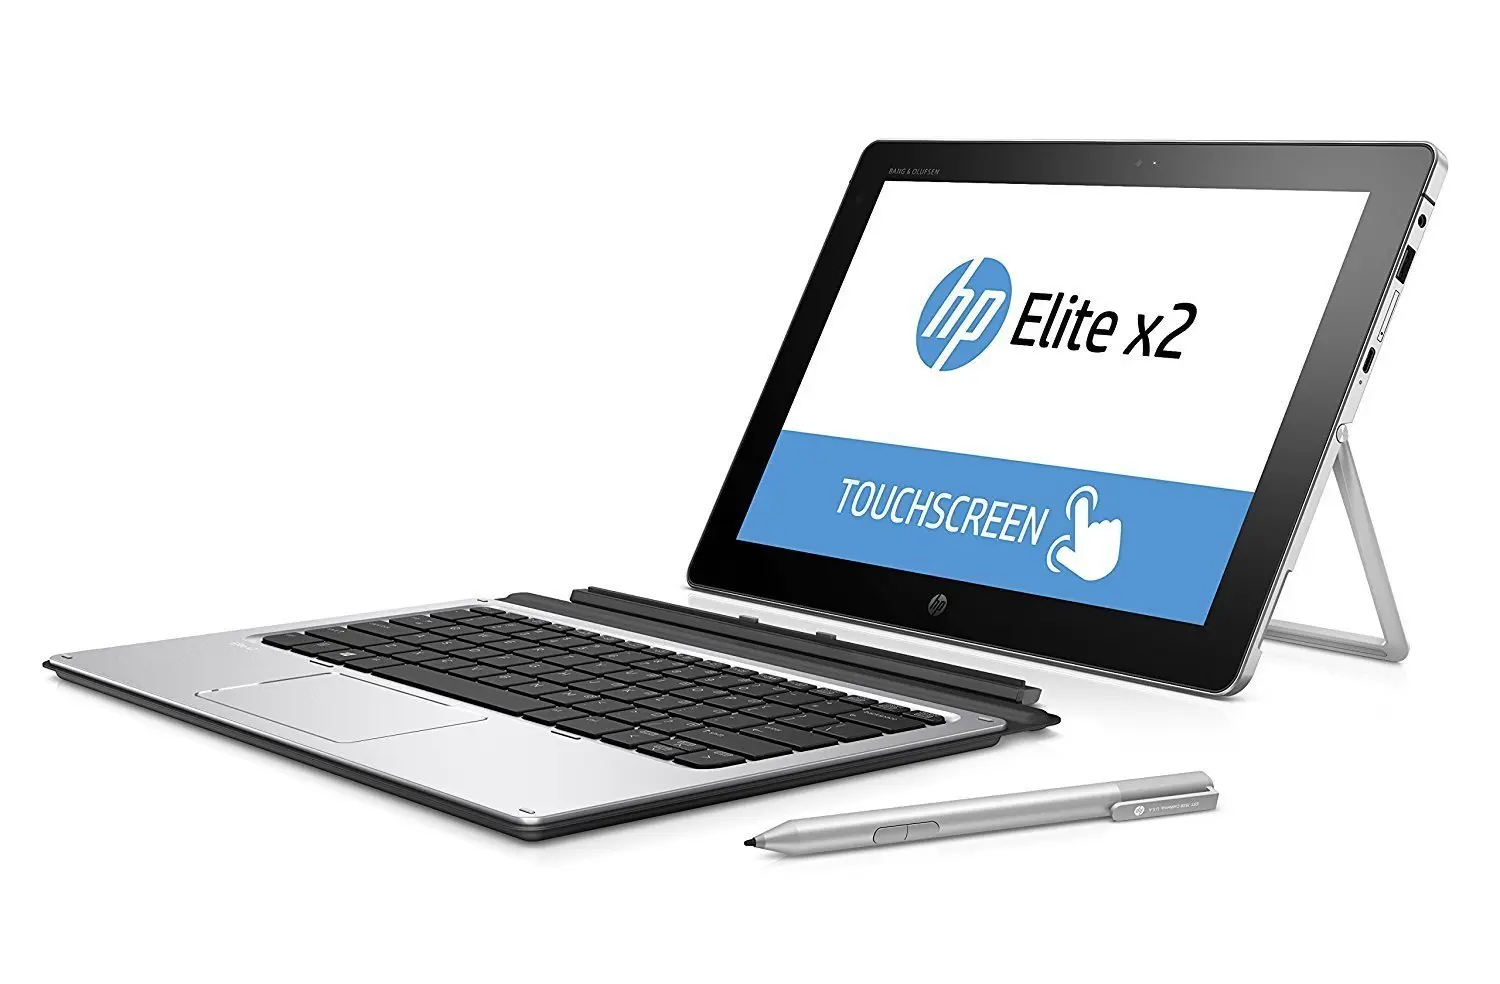 hewlett packard elite x2 tablet - What are the specs of the HP Elite X2